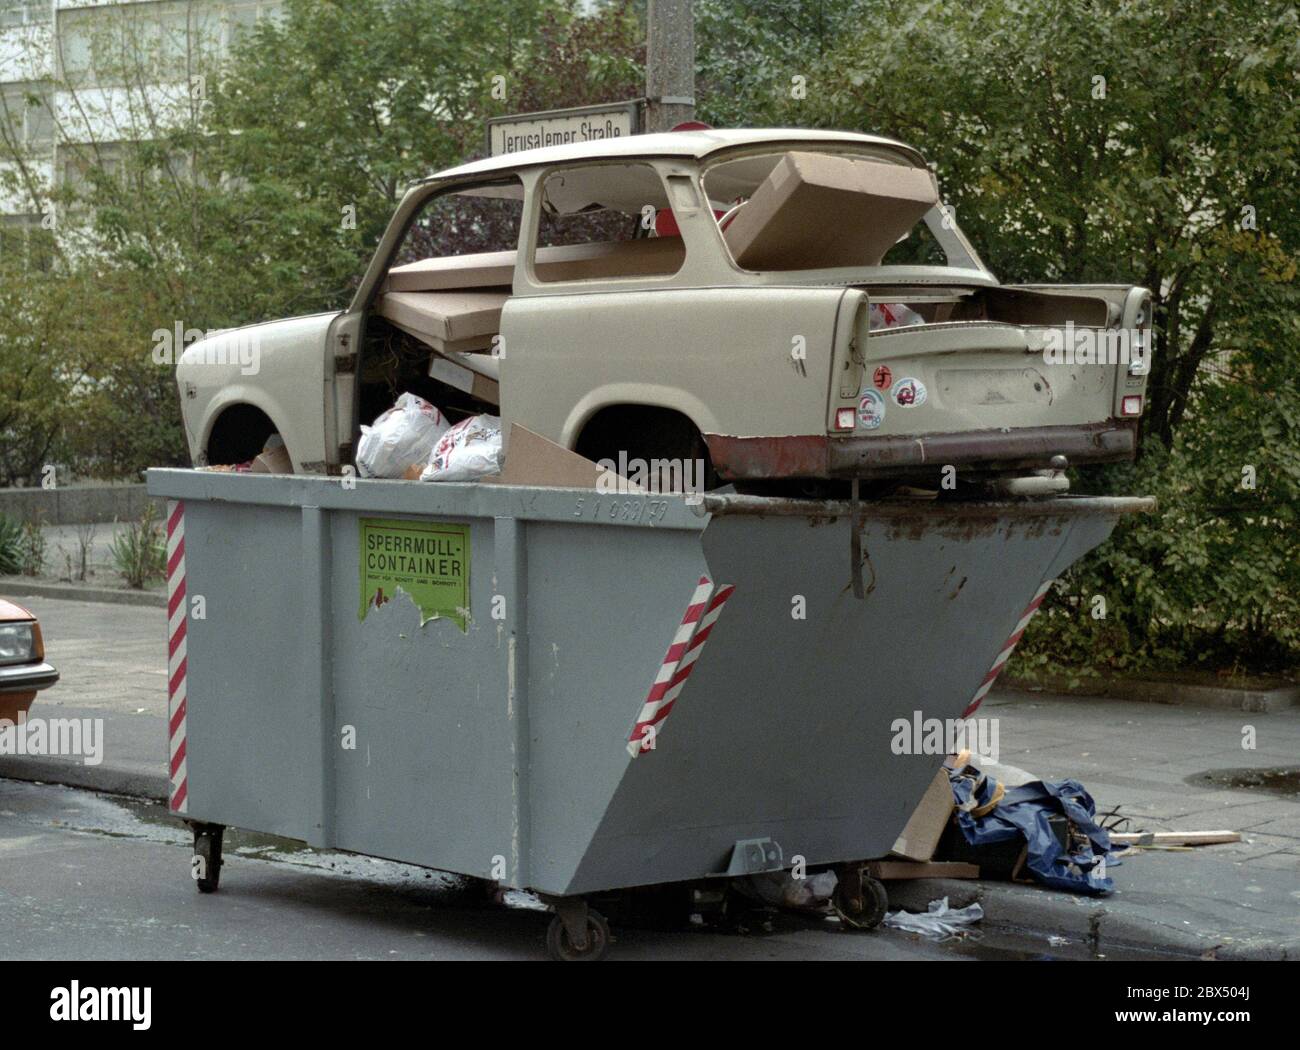 Berlin-Mitte / GDR / 1990 A Trabi, symbol of GDR prosperity, is disposed of, near Leipziger Strasse, a symbol for the end of the GDR // Muell / Abfall / Einigung / Wende / Wirtschaft / *** Local Caption *** East Germany / CommunismThe car Trabi-Trabant was the standard car in communist Germany, a sign for moderate wealth. After the unification those cars were only junk, like big parts of the whole economy.the communist symbol in a junk carbage container [automated translation] Stock Photo